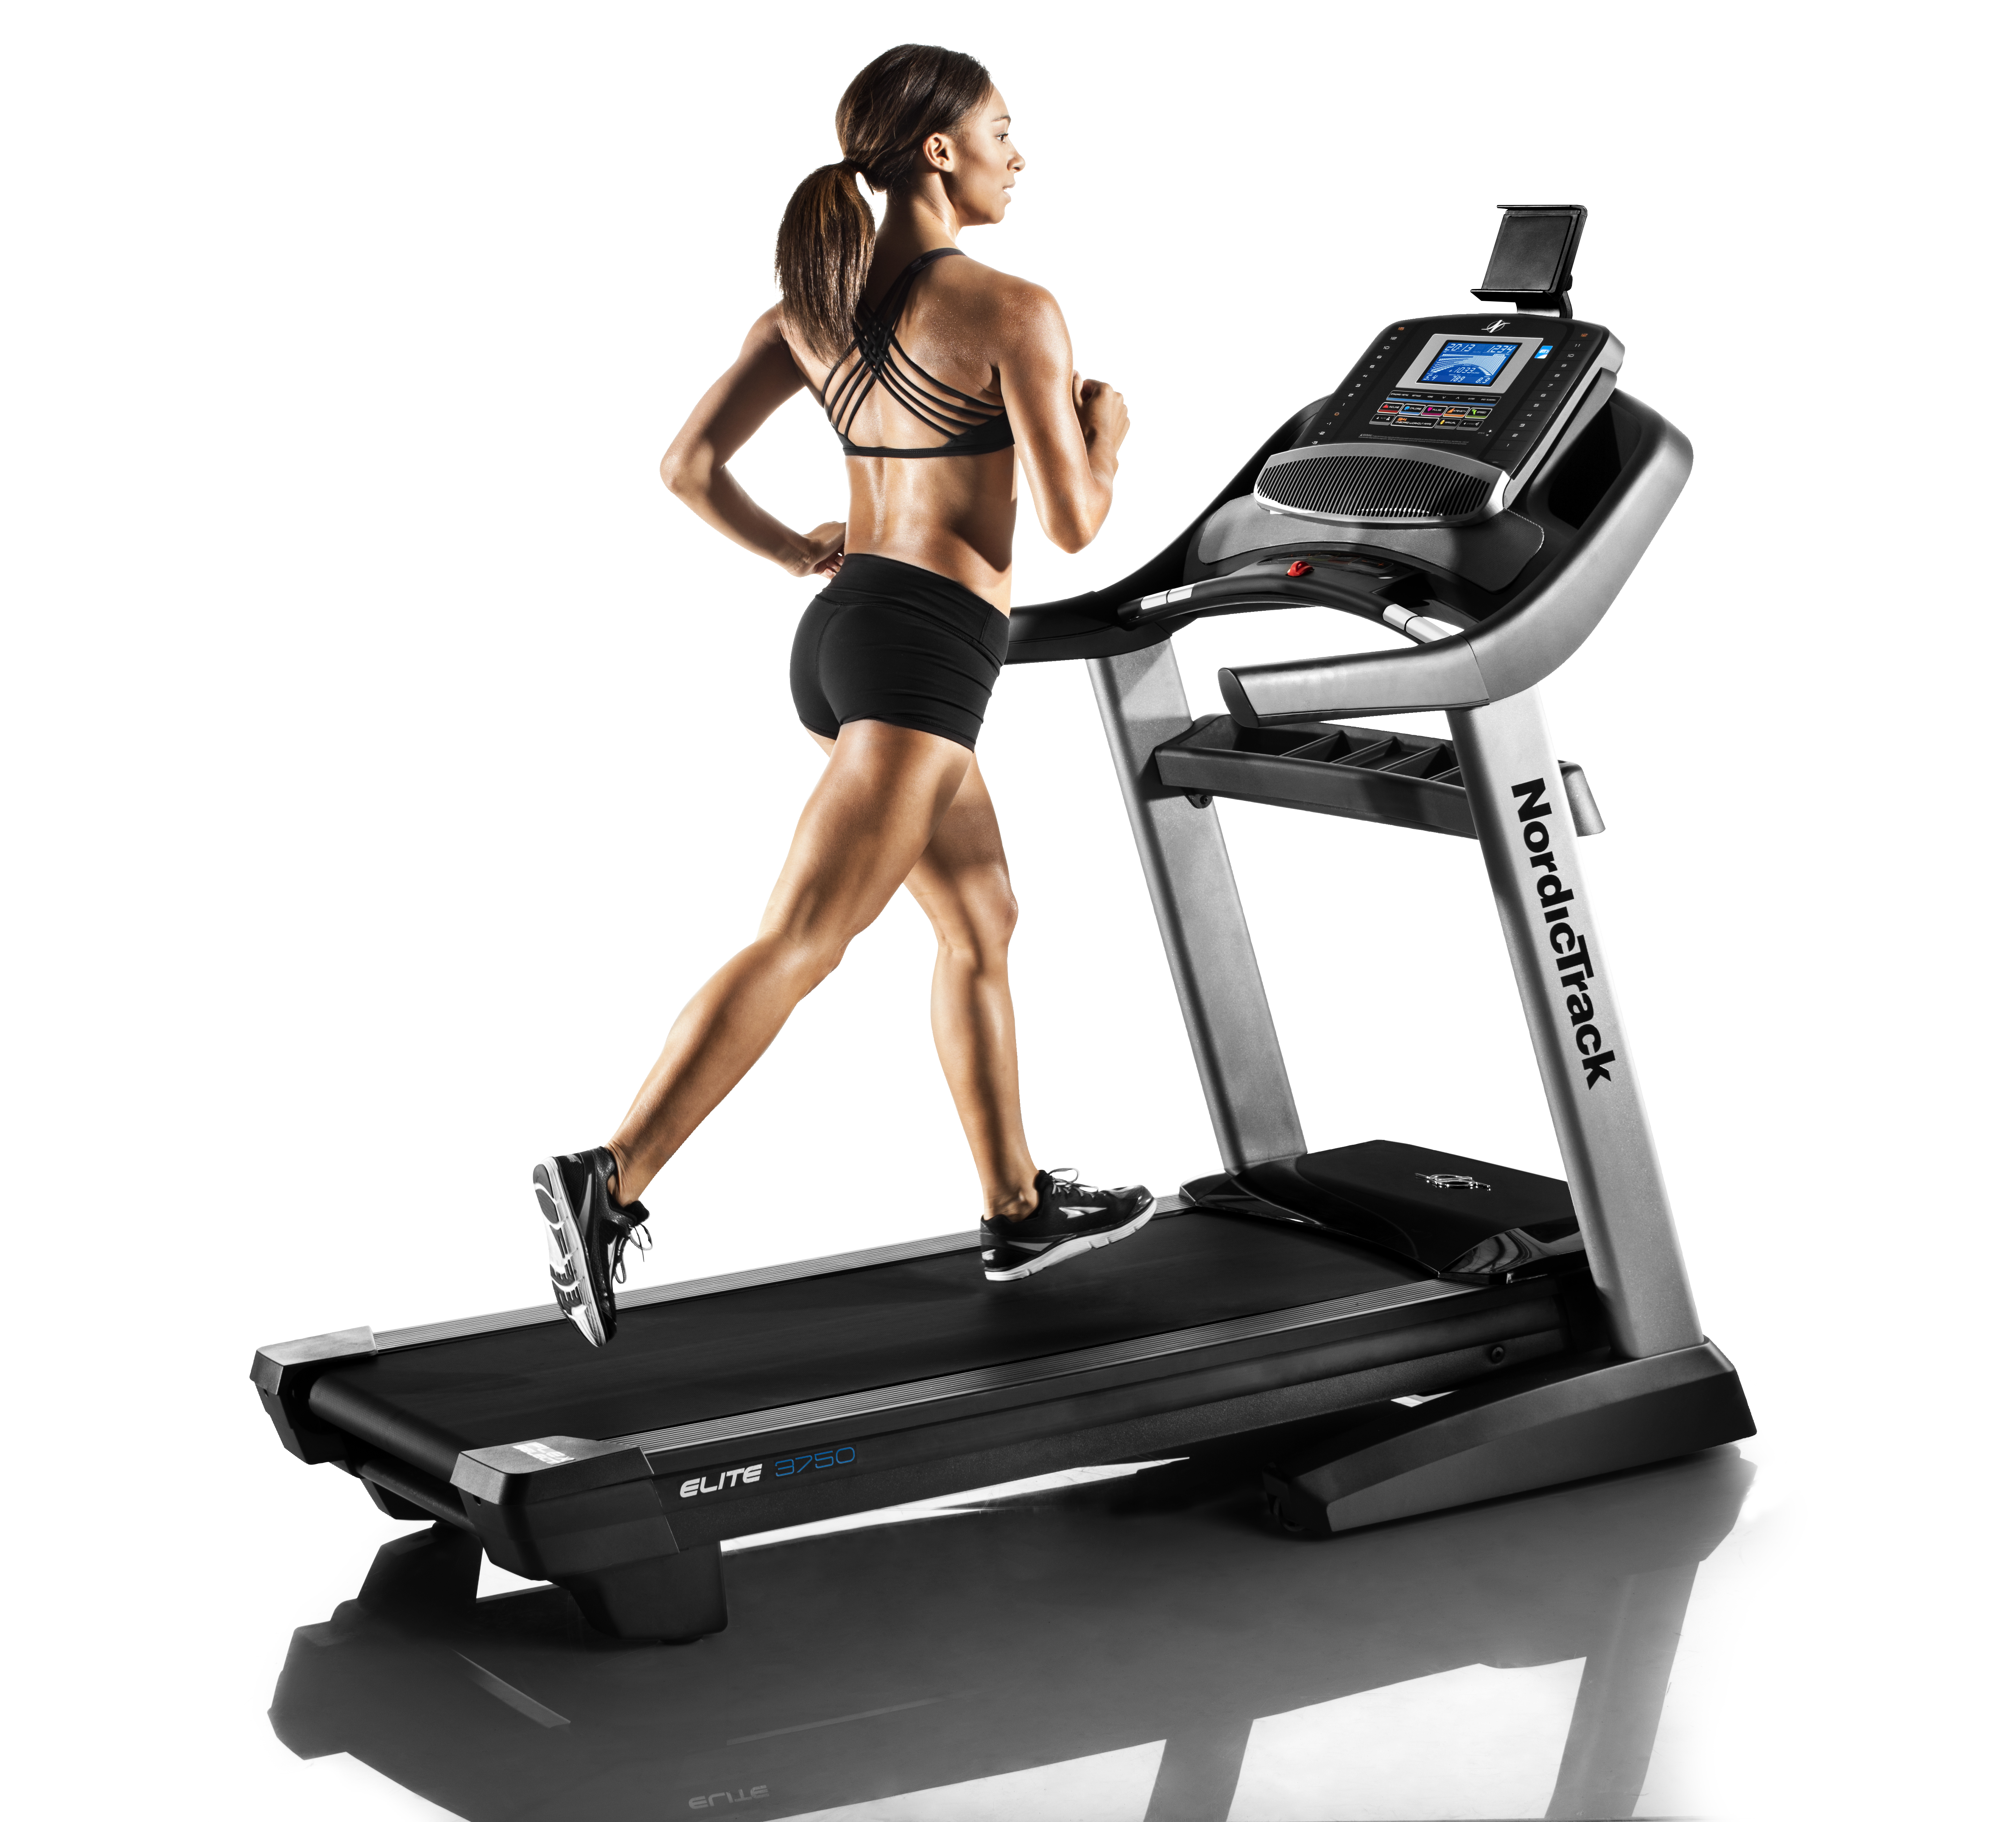 NordicTrack Elite 3750 Treadmill with iFit Coach 1 YR Membership